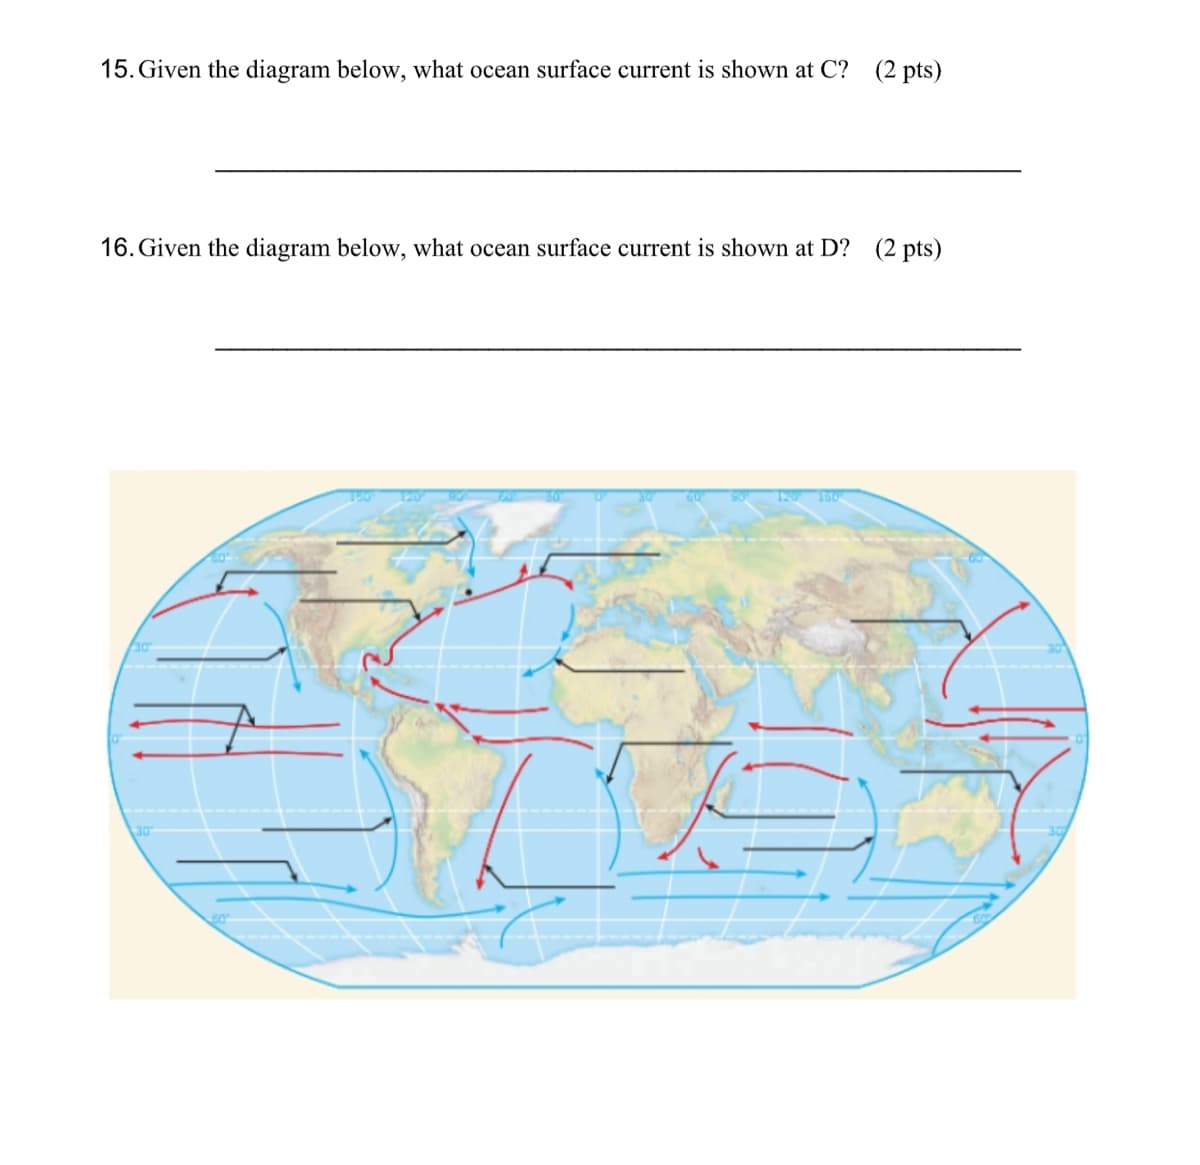 15. Given the diagram below, what ocean surface current is shown at C? (2 pts)
16. Given the diagram below, what ocean surface current is shown at D? (2 pts)
60
150 120 90
120 150